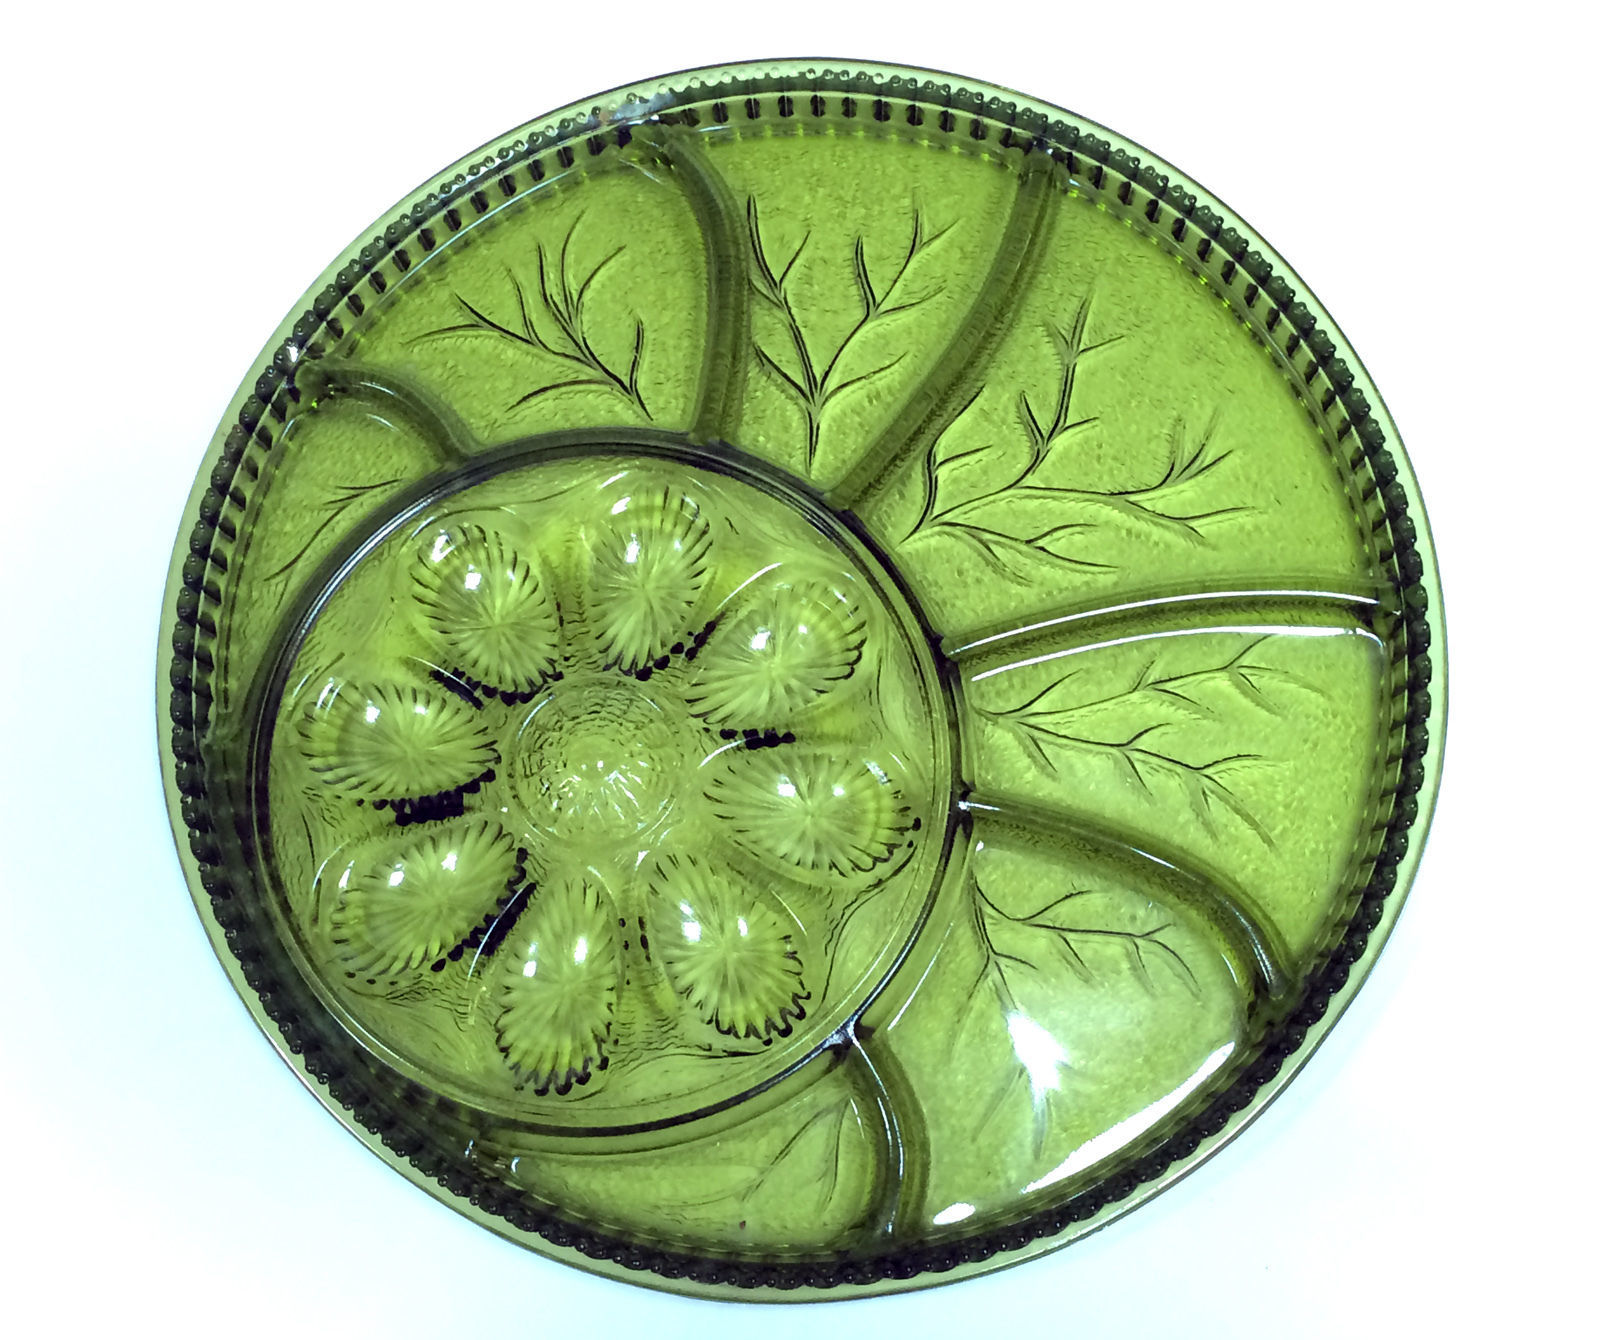 Indiana glass egg plate